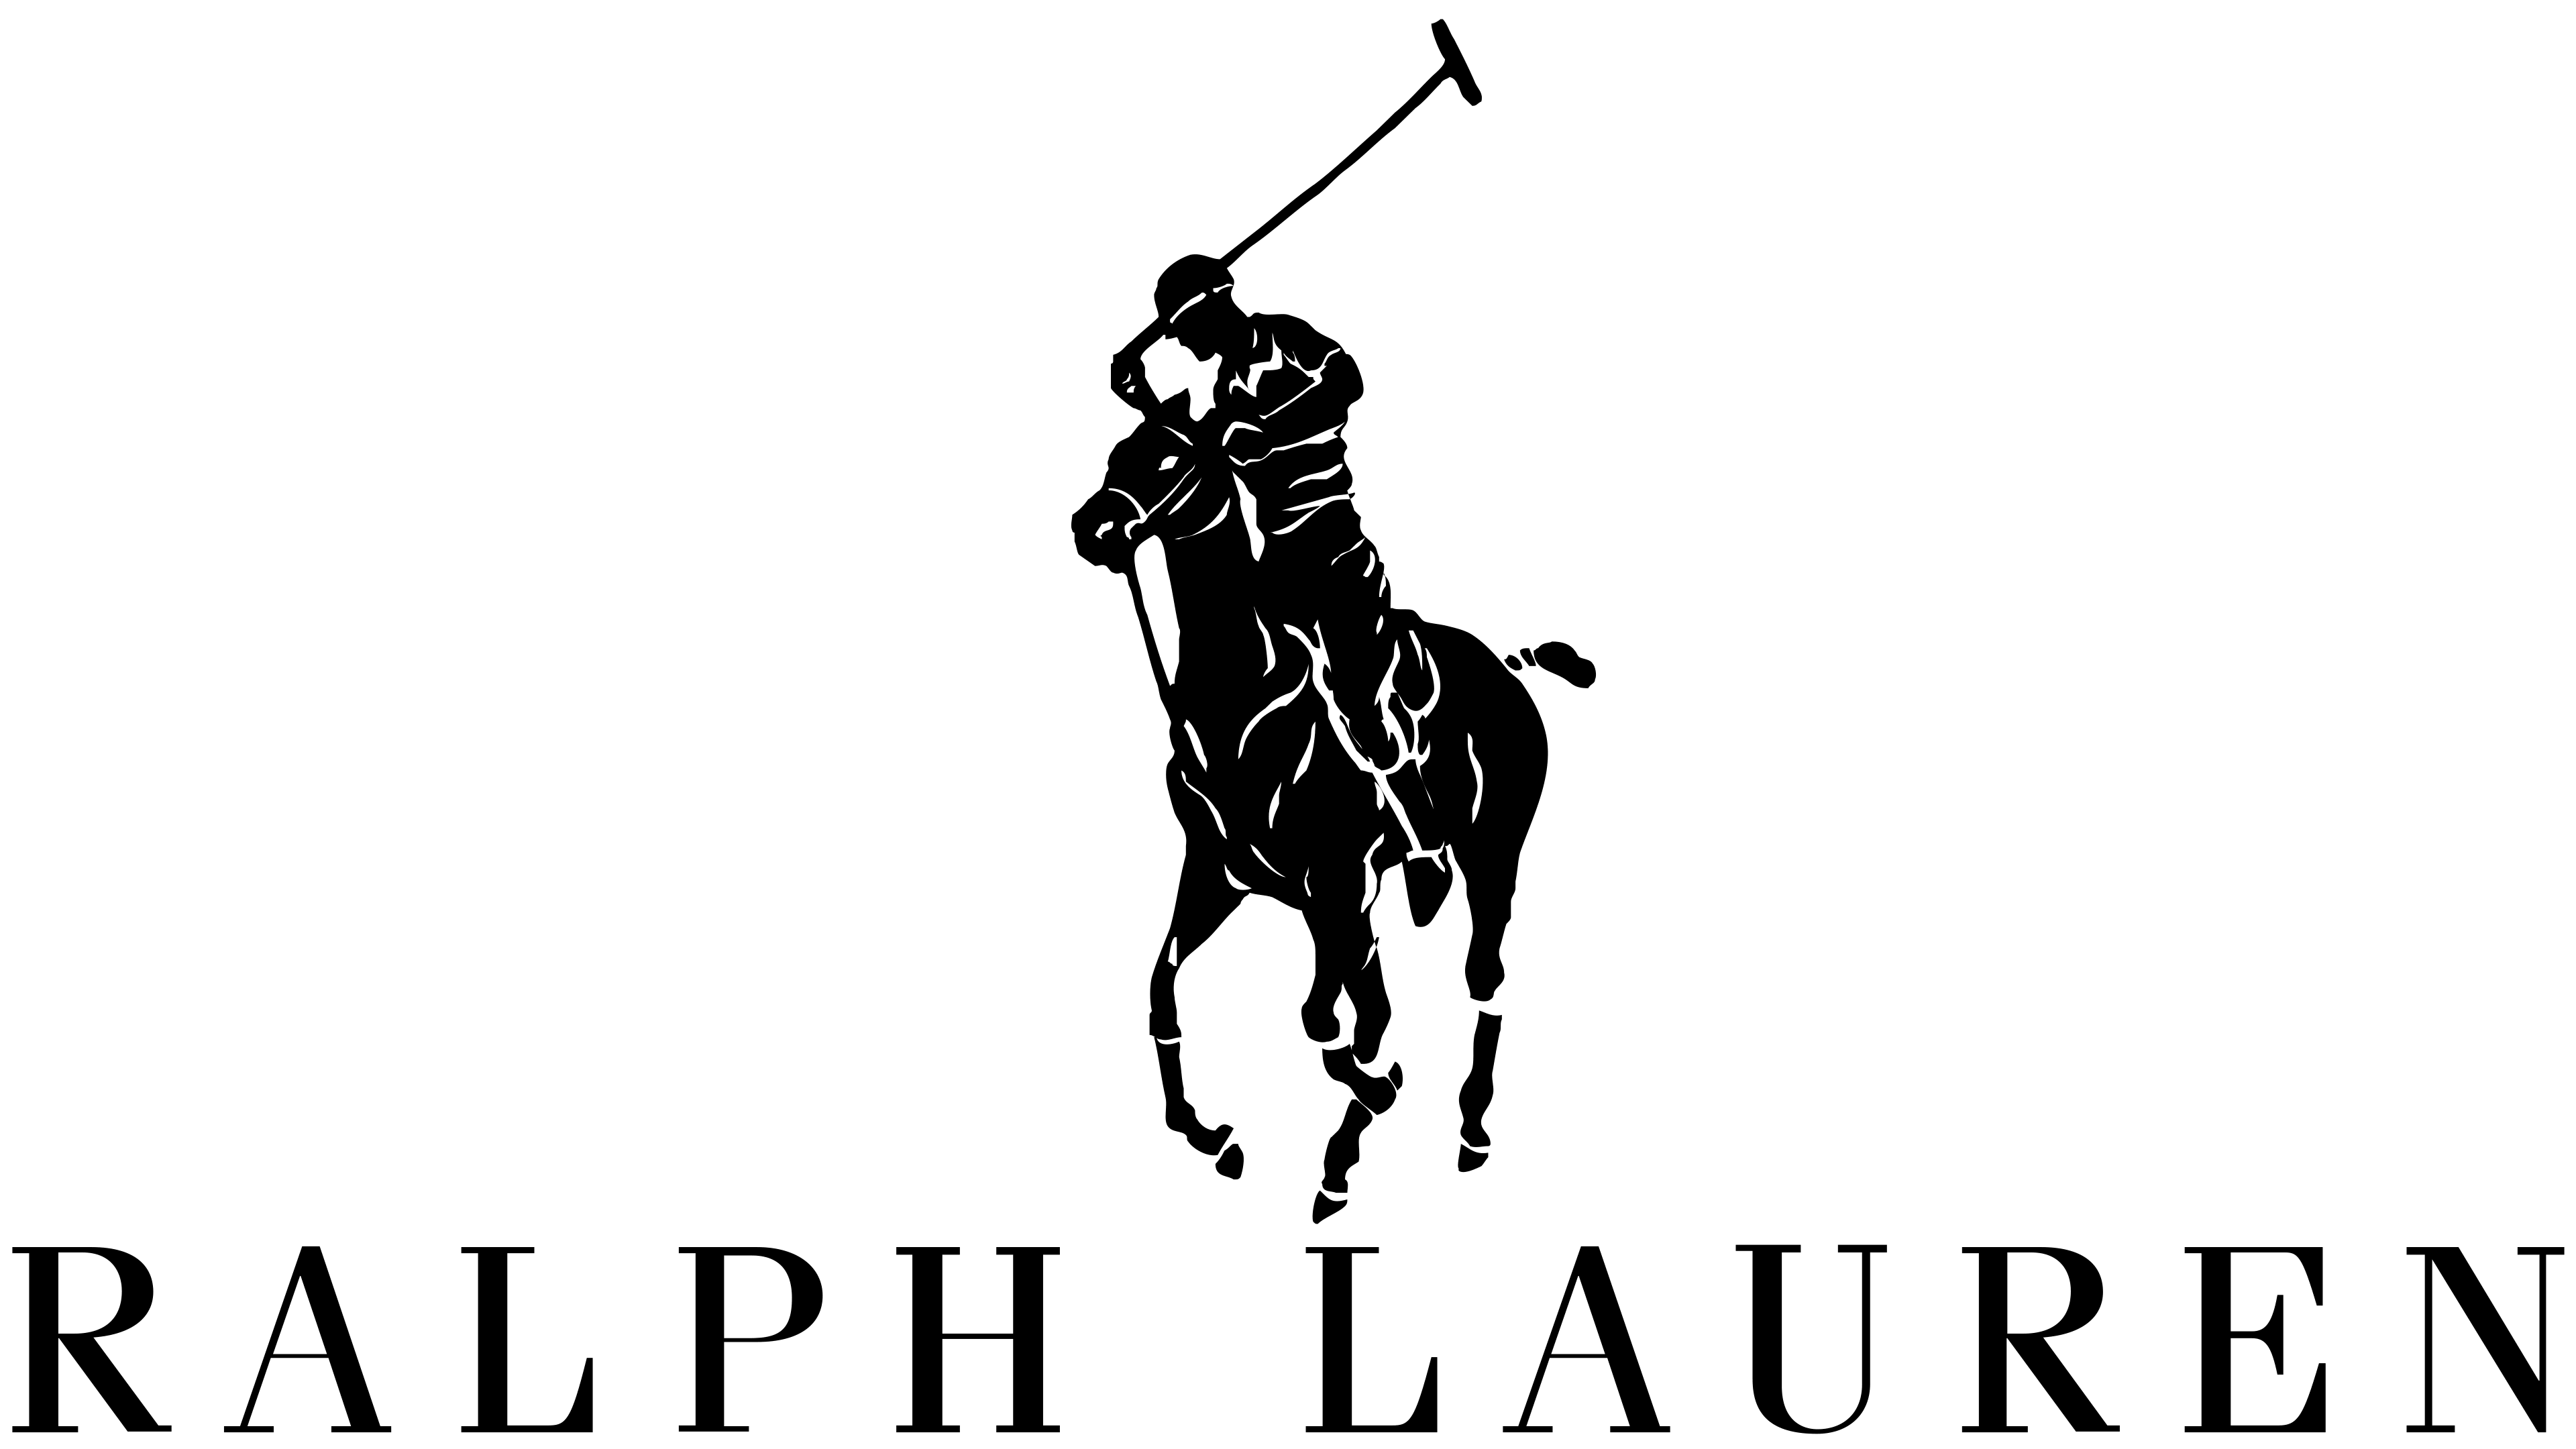 polo-logo-png-ralph-lauren-logo-the-most-famous-brands-and-company-logos-in-3840x2160